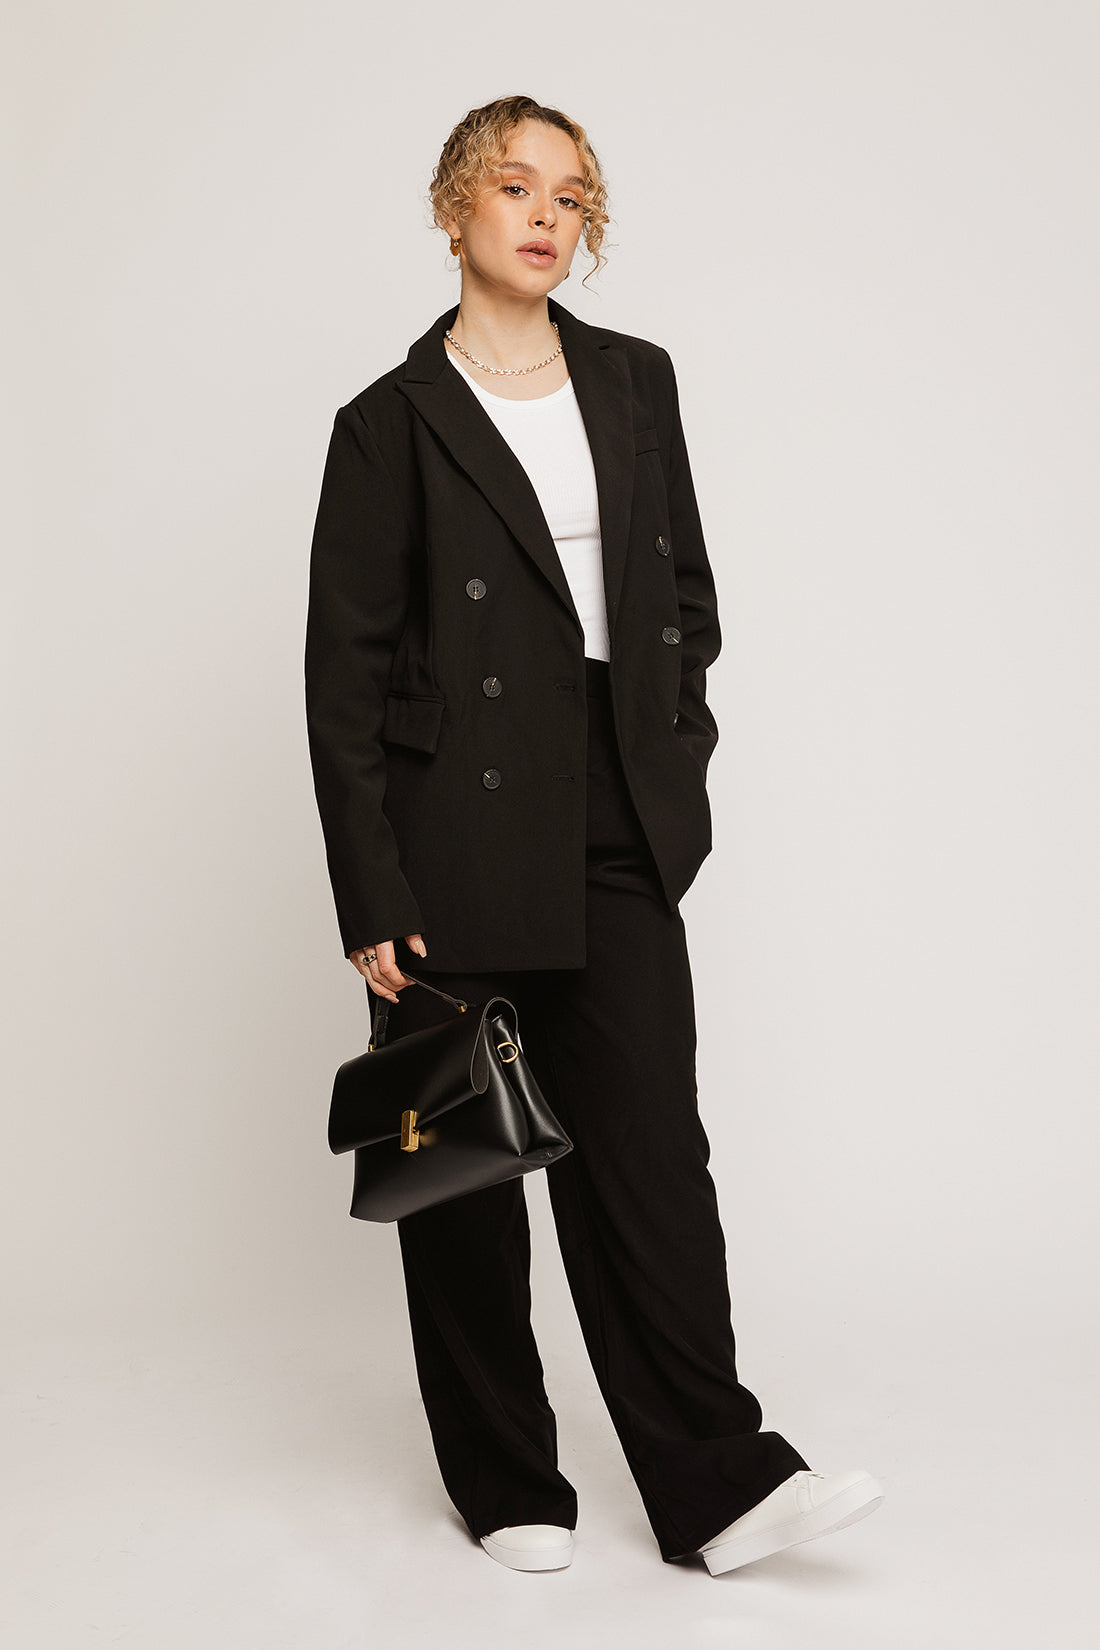 Everleigh Black Suit Trousers - Sugar + Style